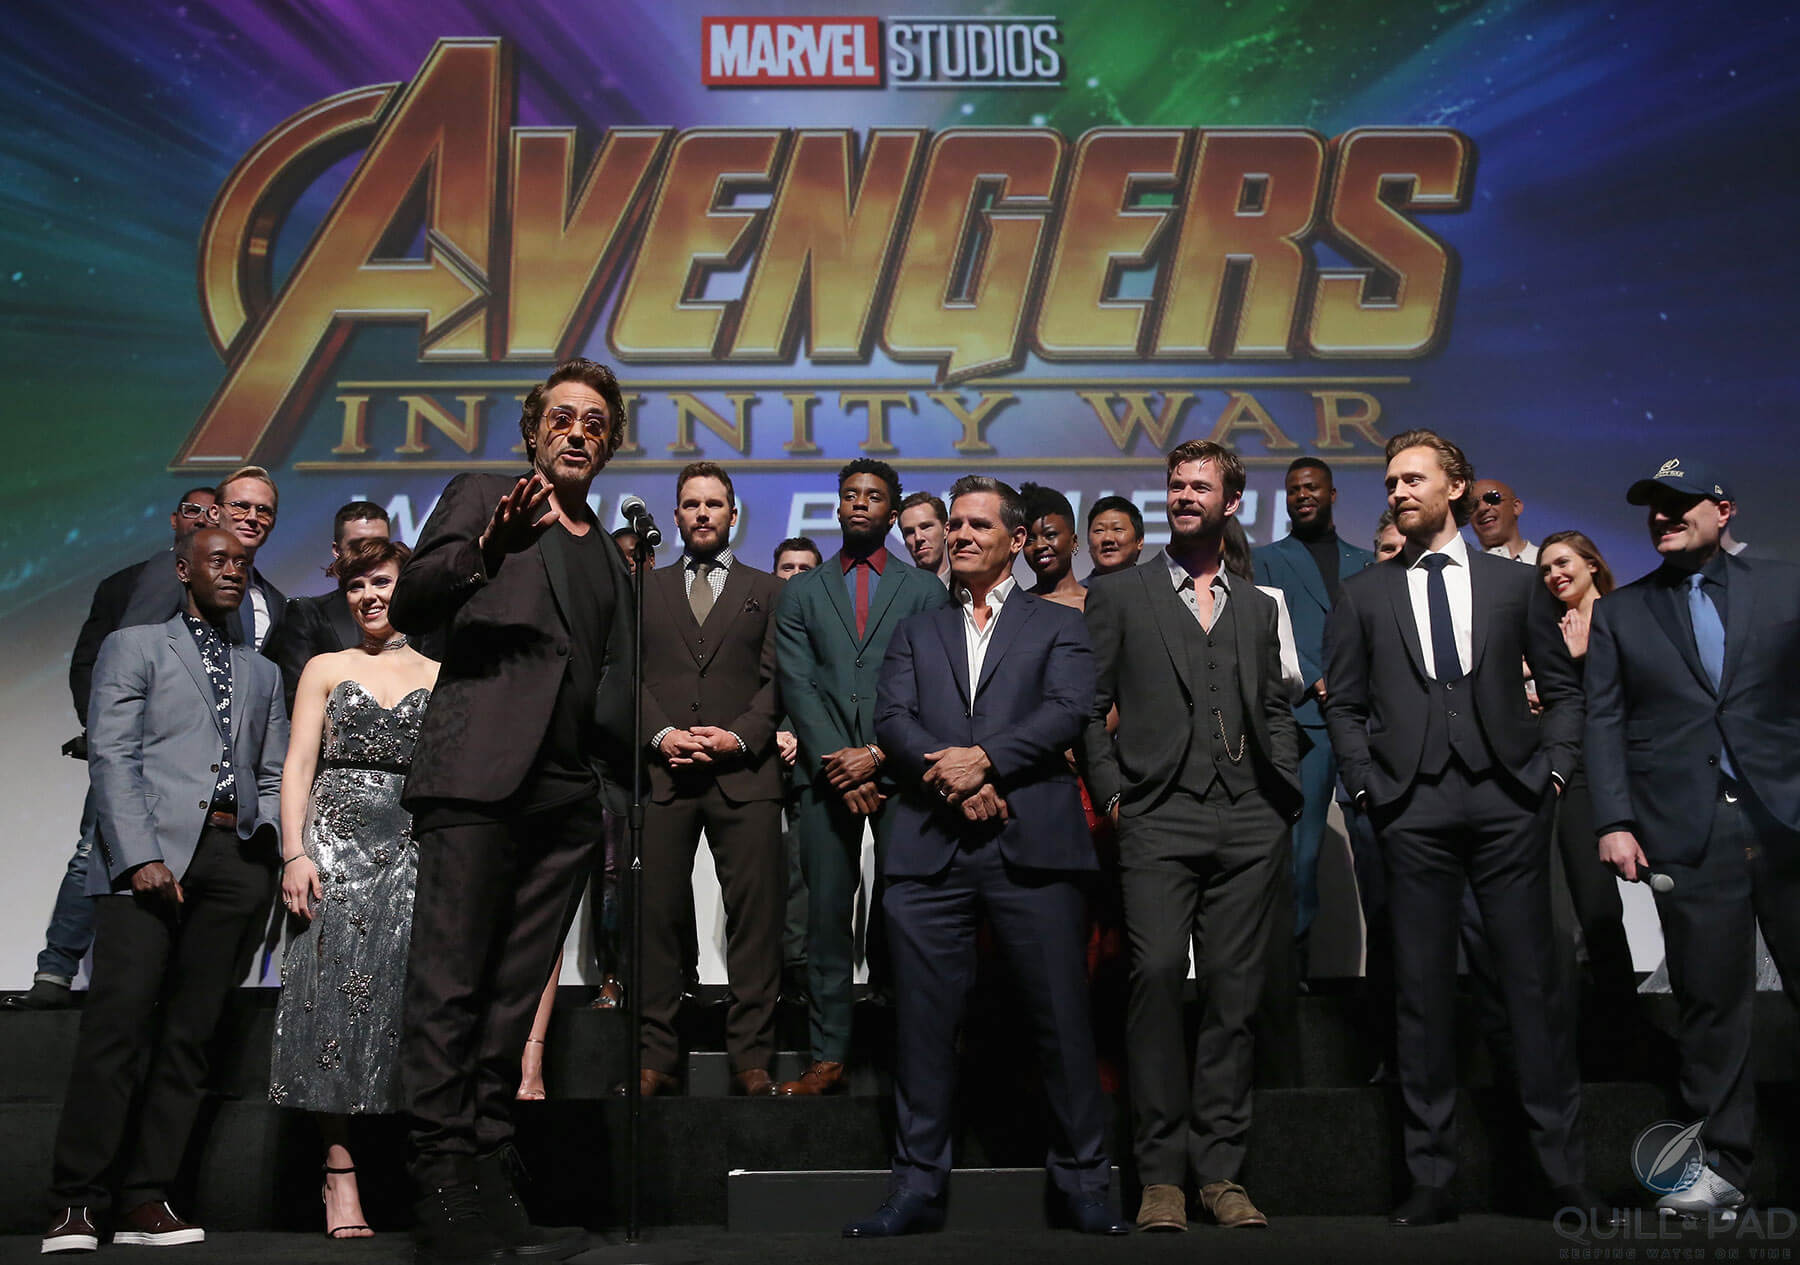 The cast of ‘Avengers: Infinity War’ at the world premier in Los Angeles (photo courtesy Citizen)